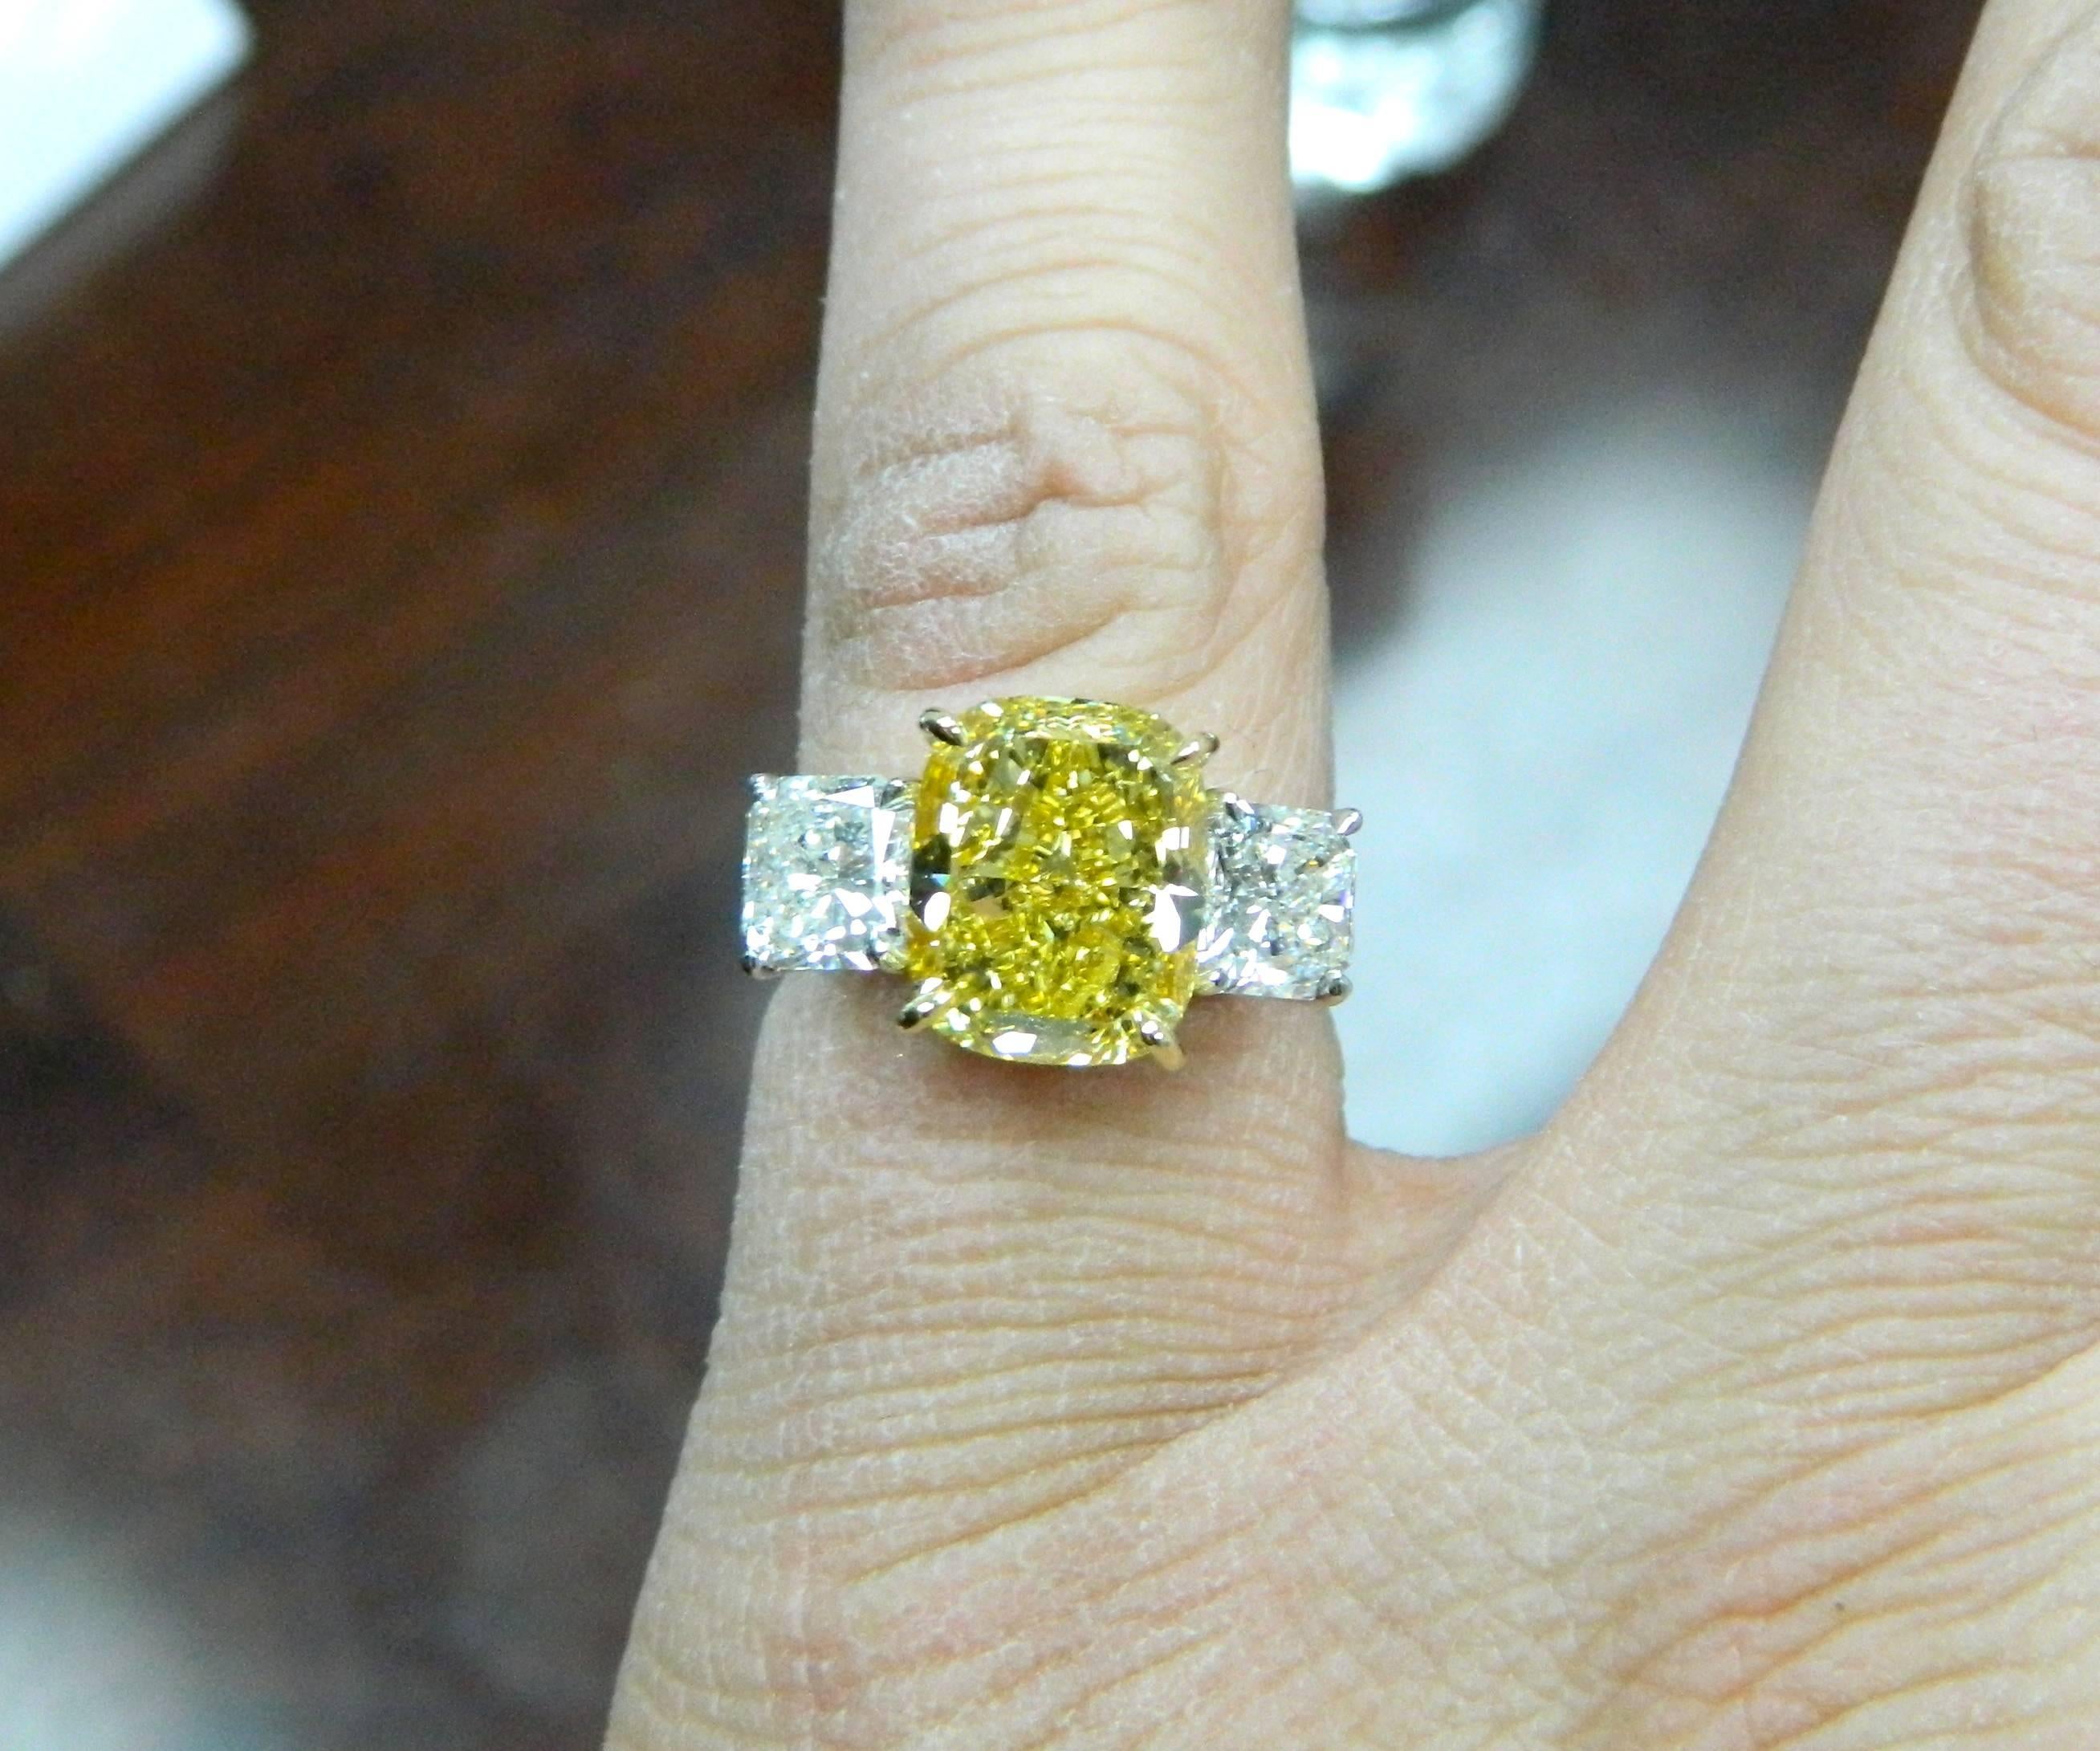 A bold and rare GIA Certified, 5.02ct Fancy Deep Yellow VS2 cushion cut diamond, flanked by two GIA certified radiant cut diamonds weighting 1.01ct and 1.00ct.  Mounted in platinum and 18kt yellow gold.